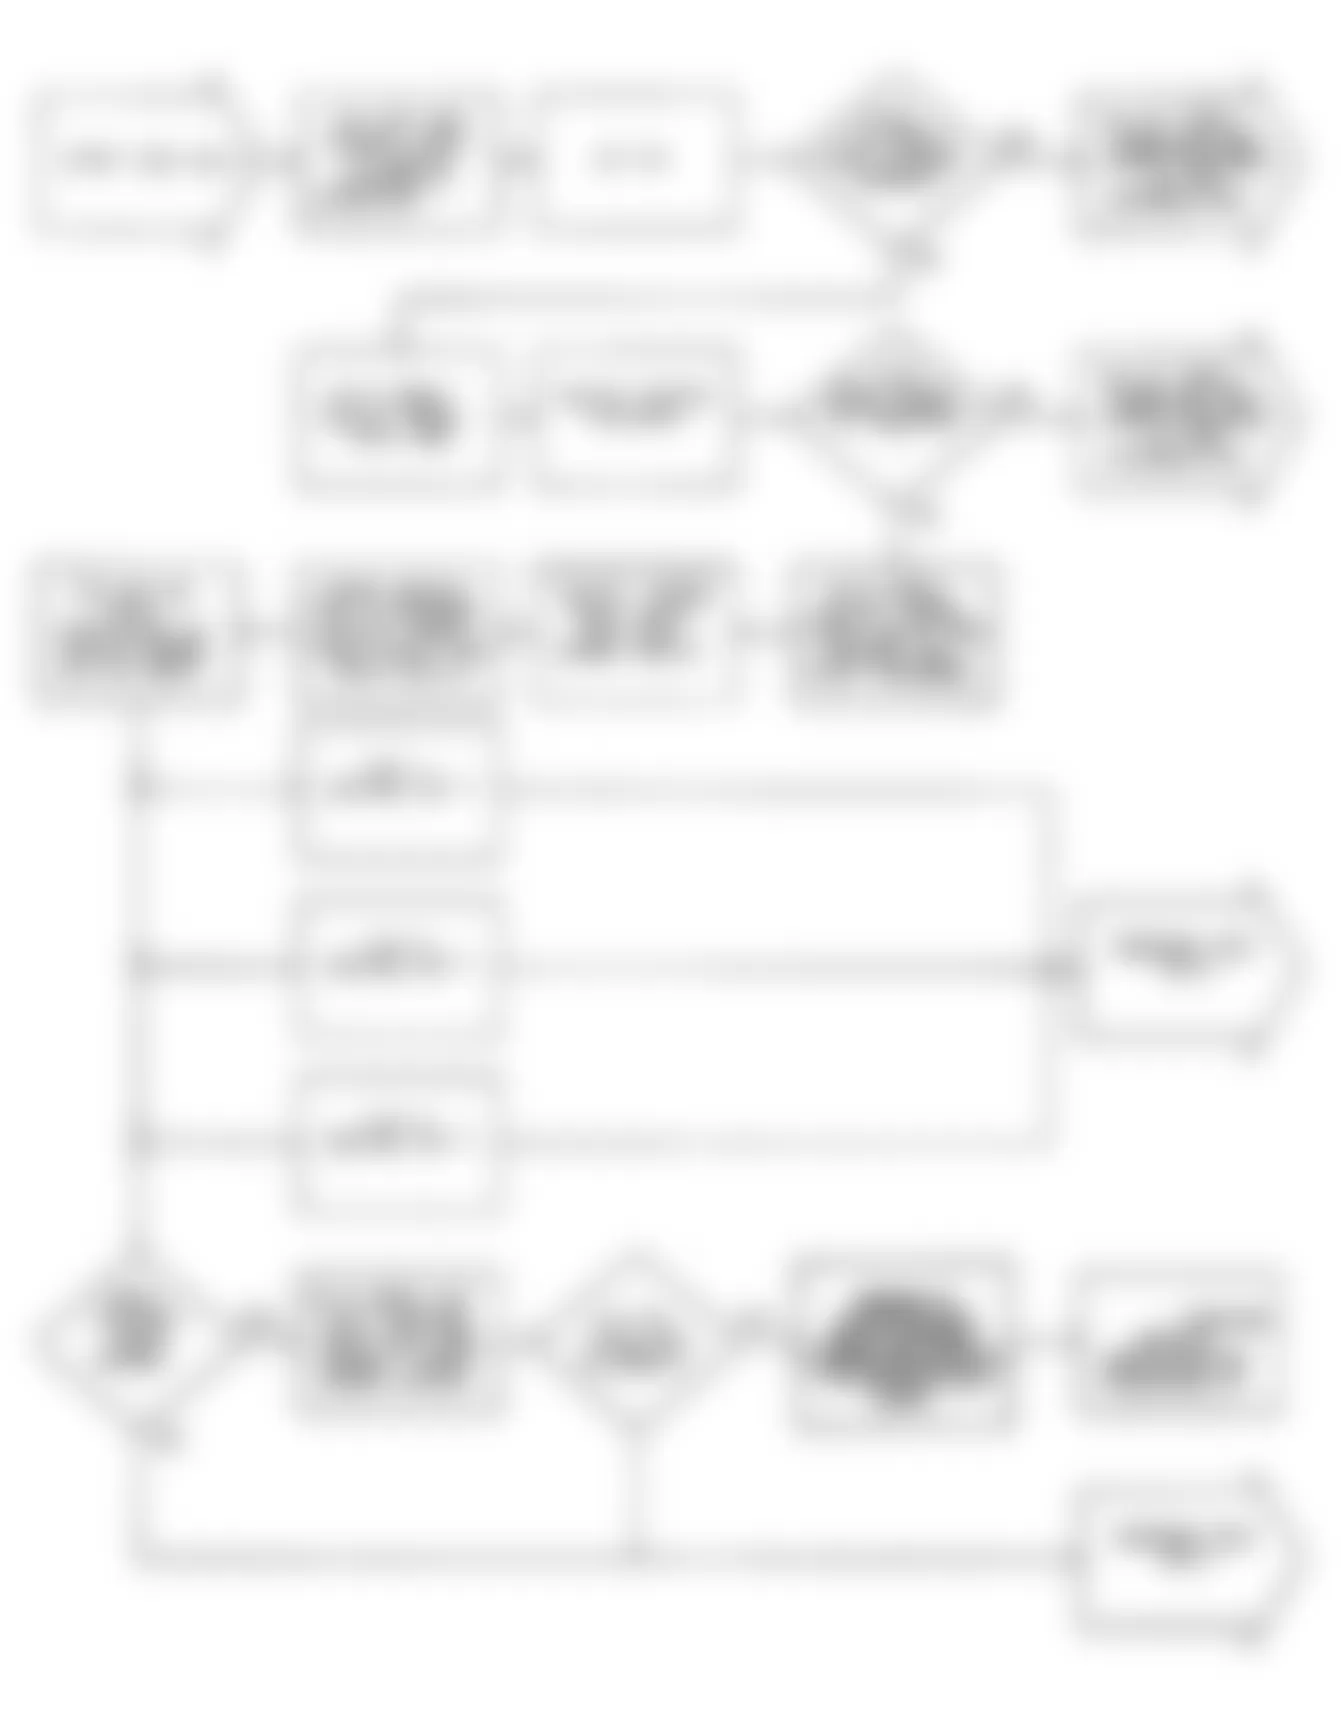 Chrysler New Yorker Salon 1990 - Component Locations -  NS2: Flow Chart